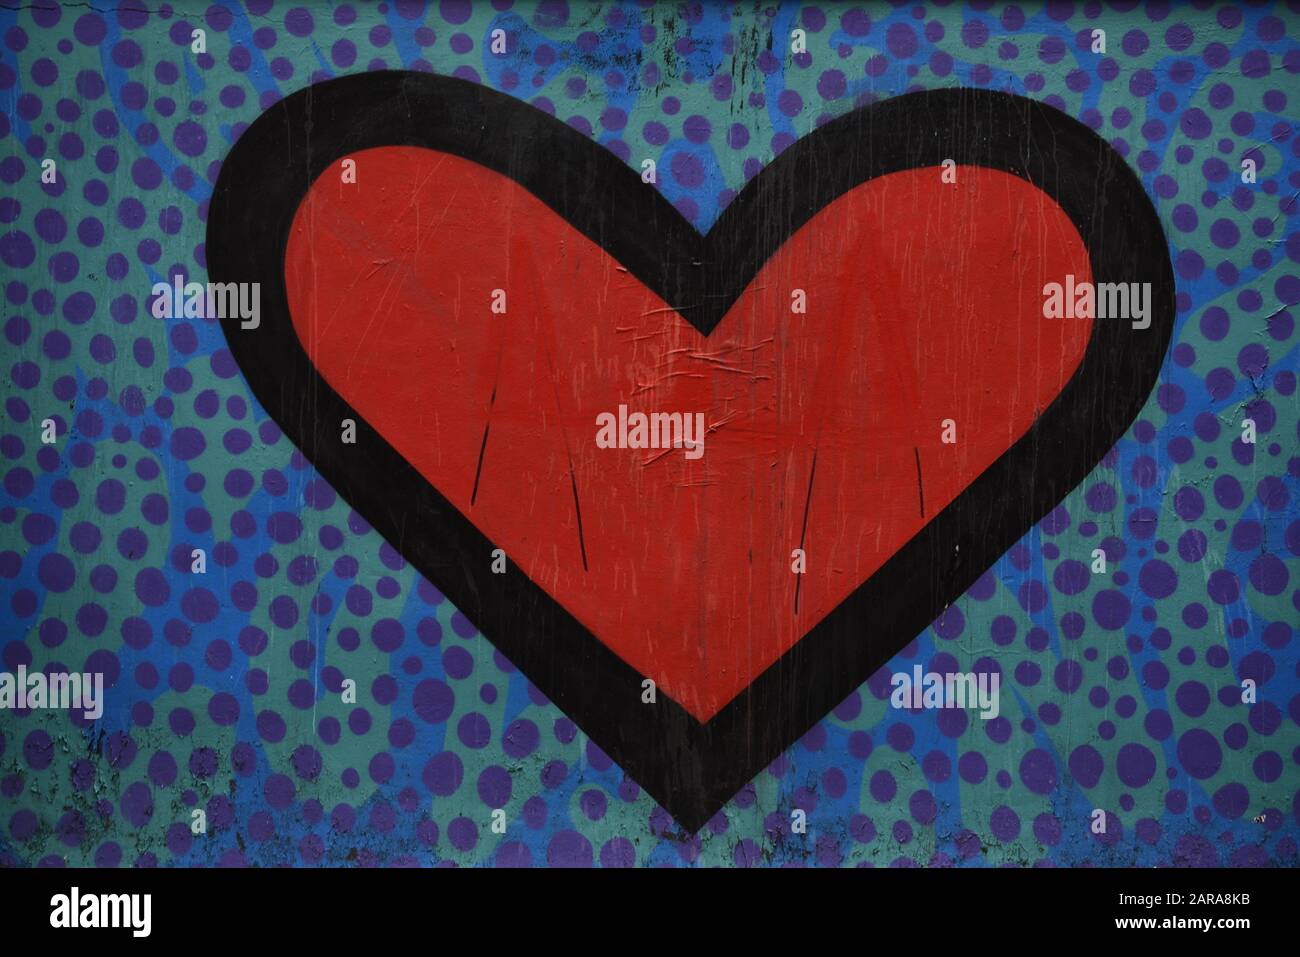 Red heart with a black background painted on a wall. Background is purple dots, paint slighty peeling. Grunge feel. Abstract and concept useage. Stock Photo